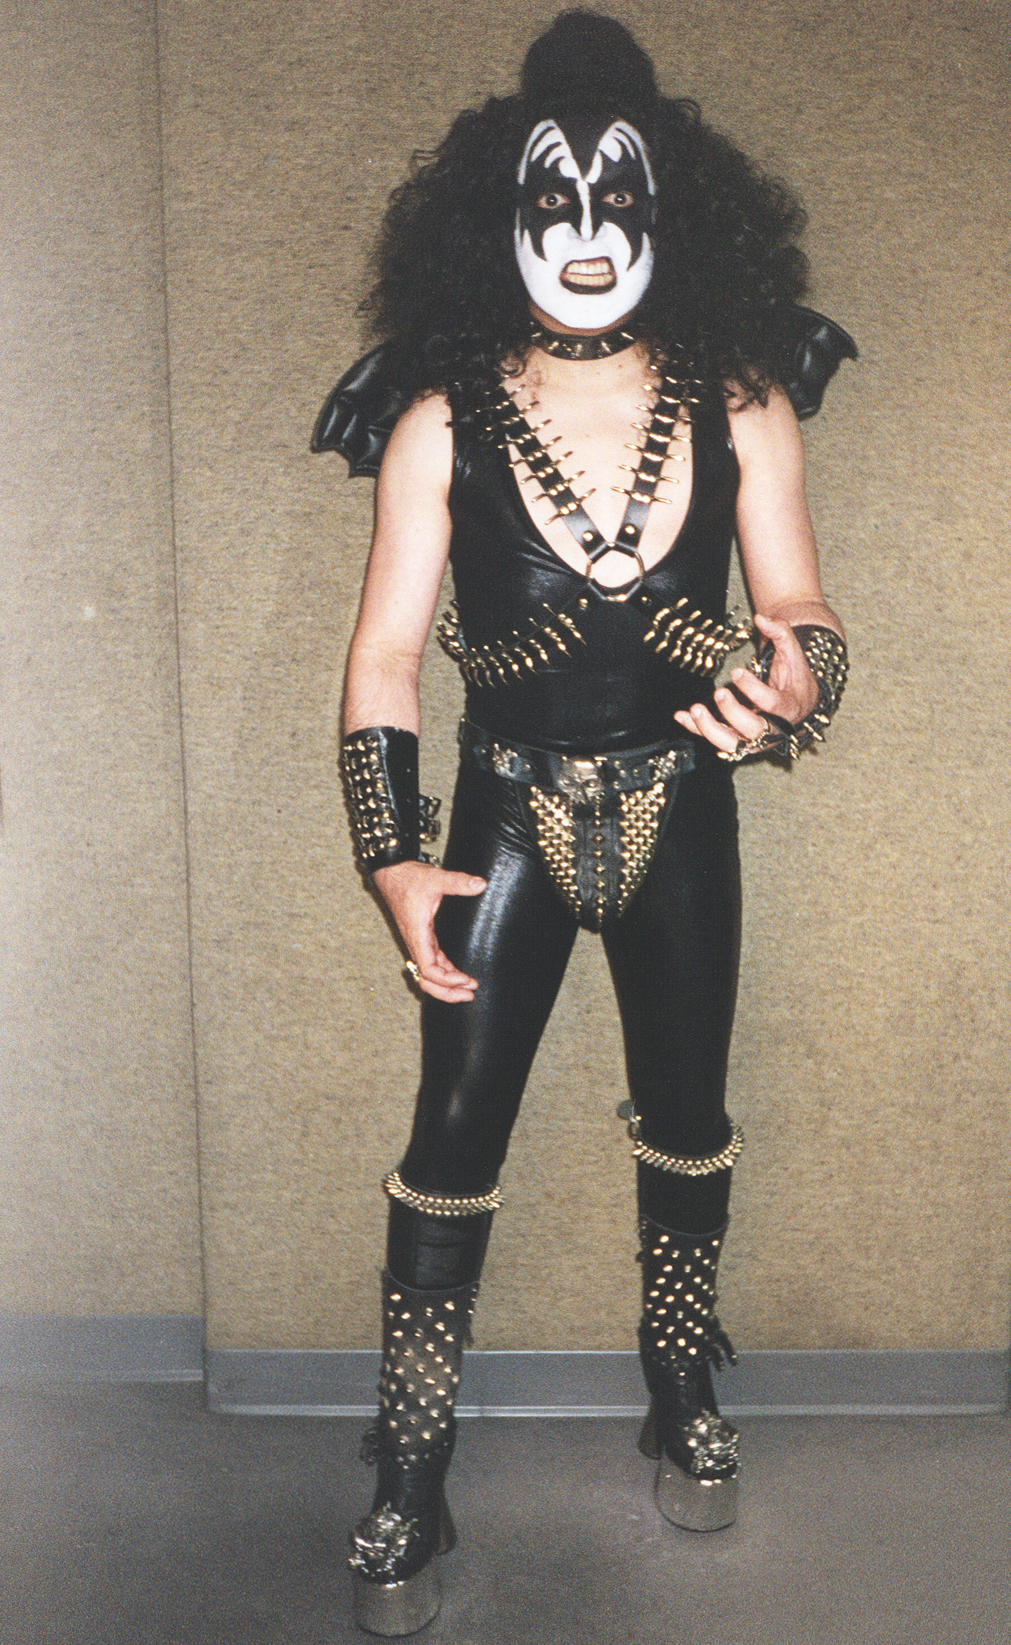 Now here I am as Gene Simmons on Saturday Night Live.